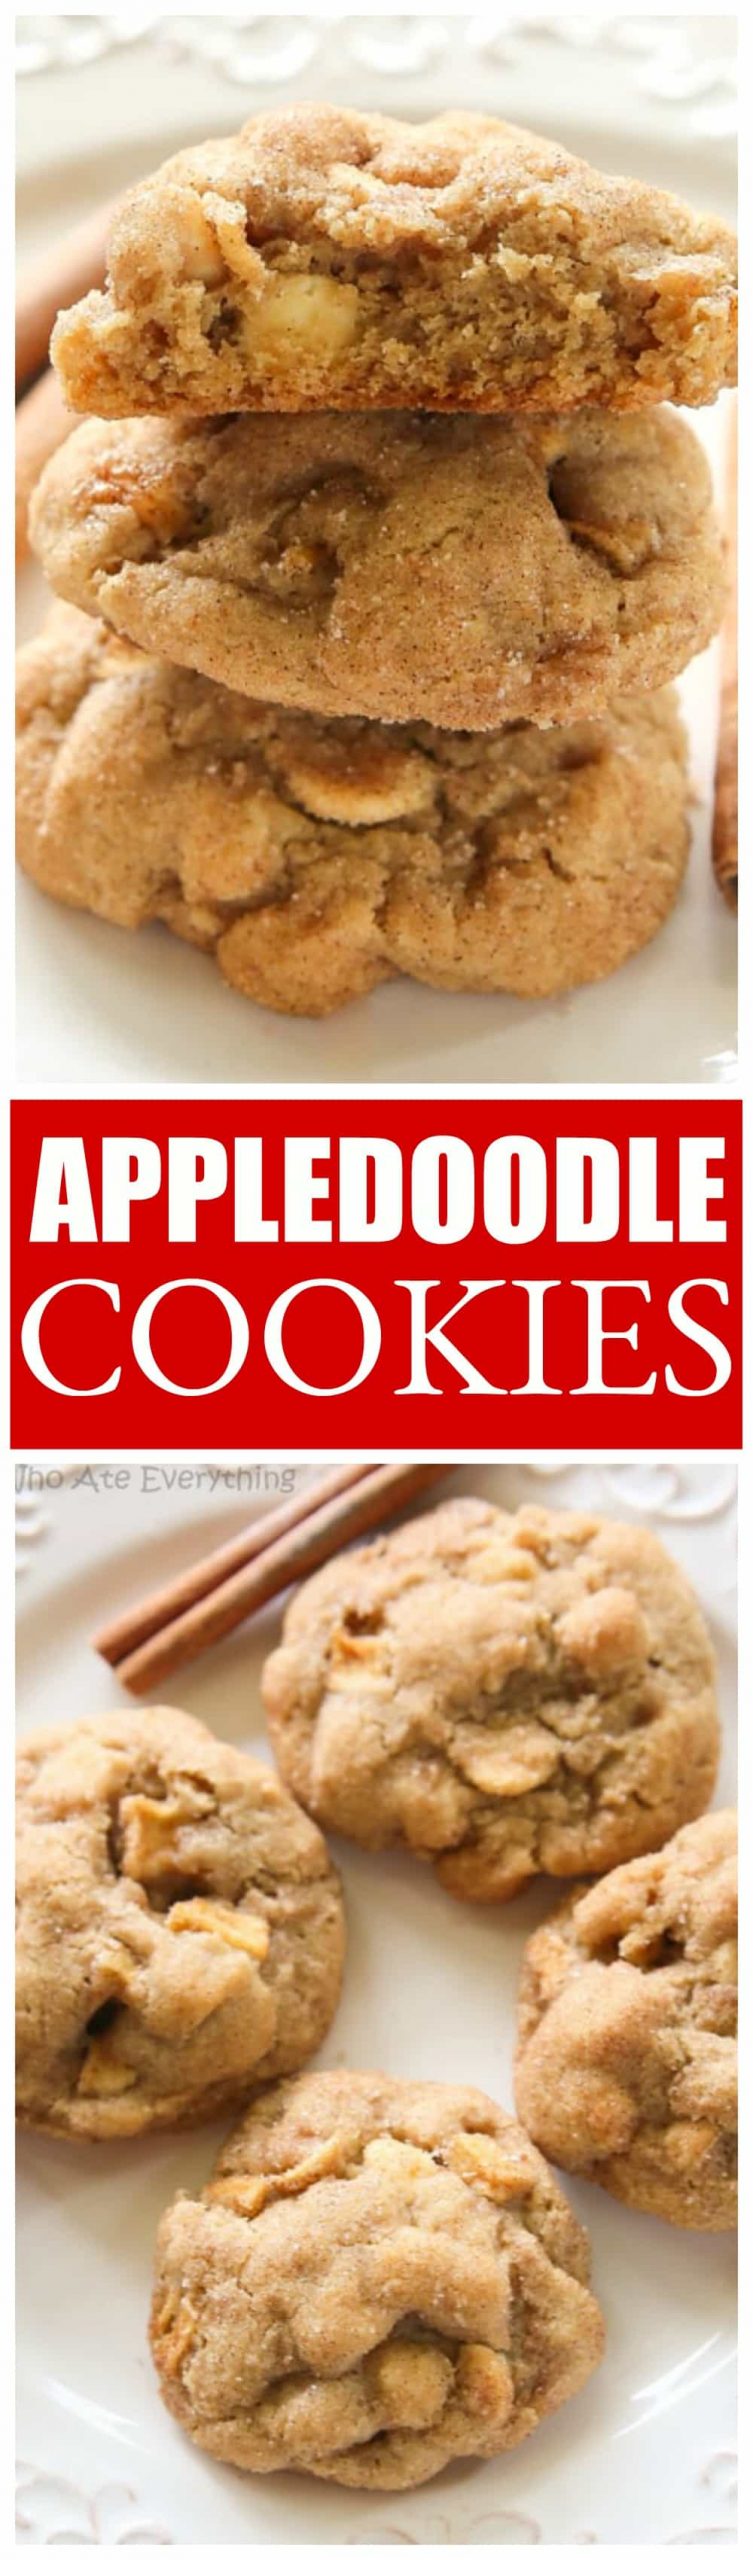 Appledoodle - a snickerdoodle meets an apple! This cookie is perfect for fall or anytime. #apple #cookies #fall #dessert #appledoodles